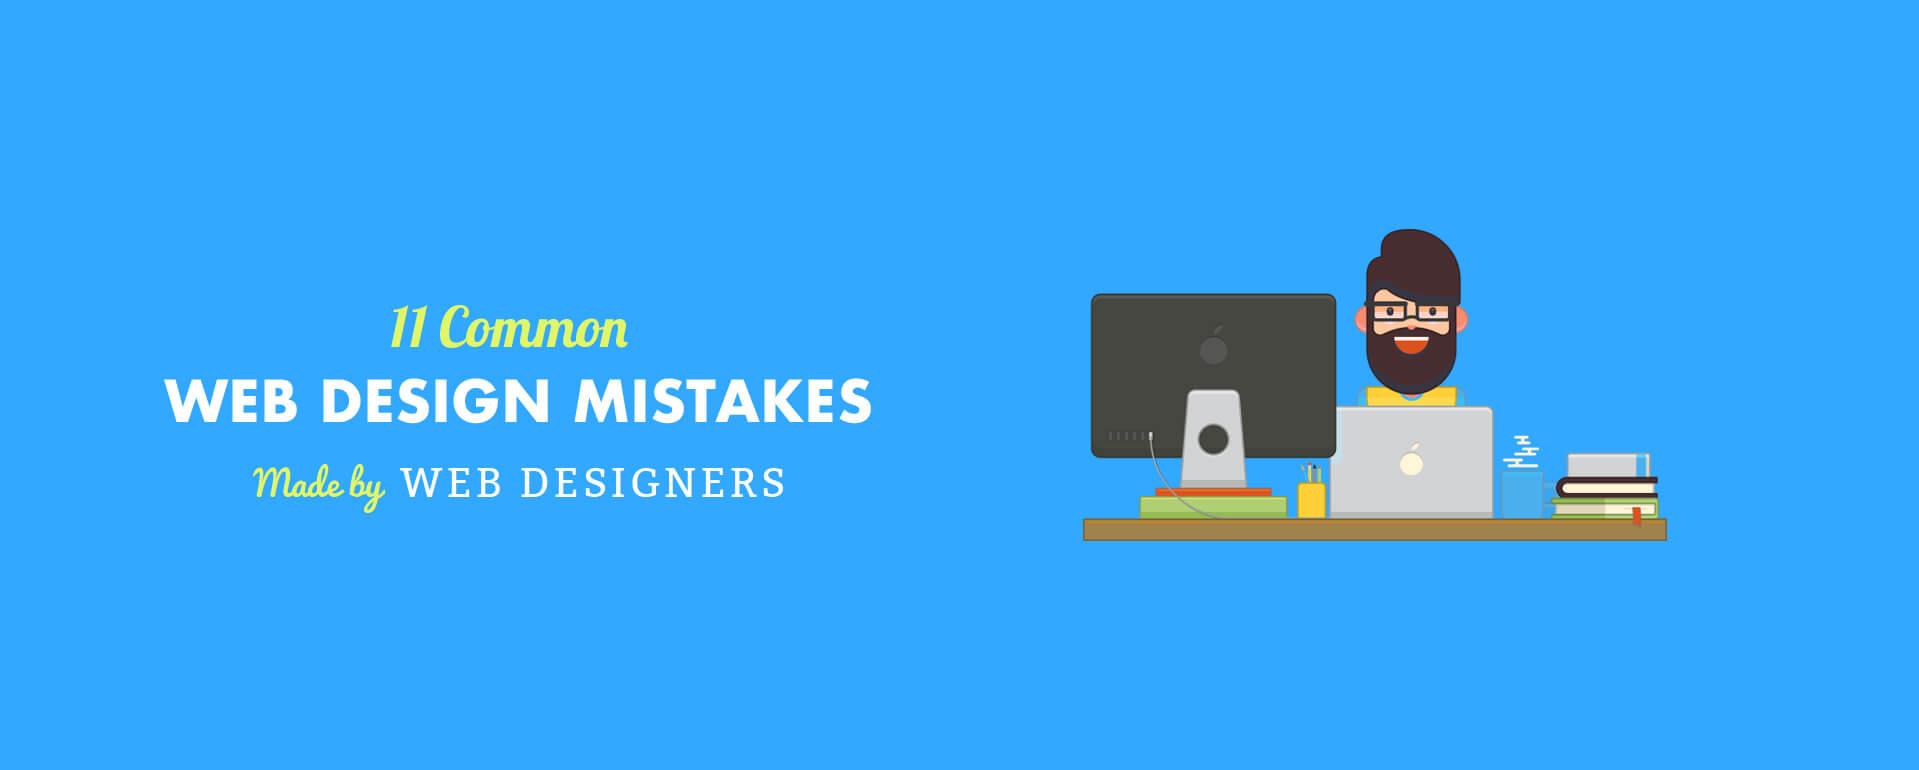 11 Common Web Design Mistakes Made by Web Designers